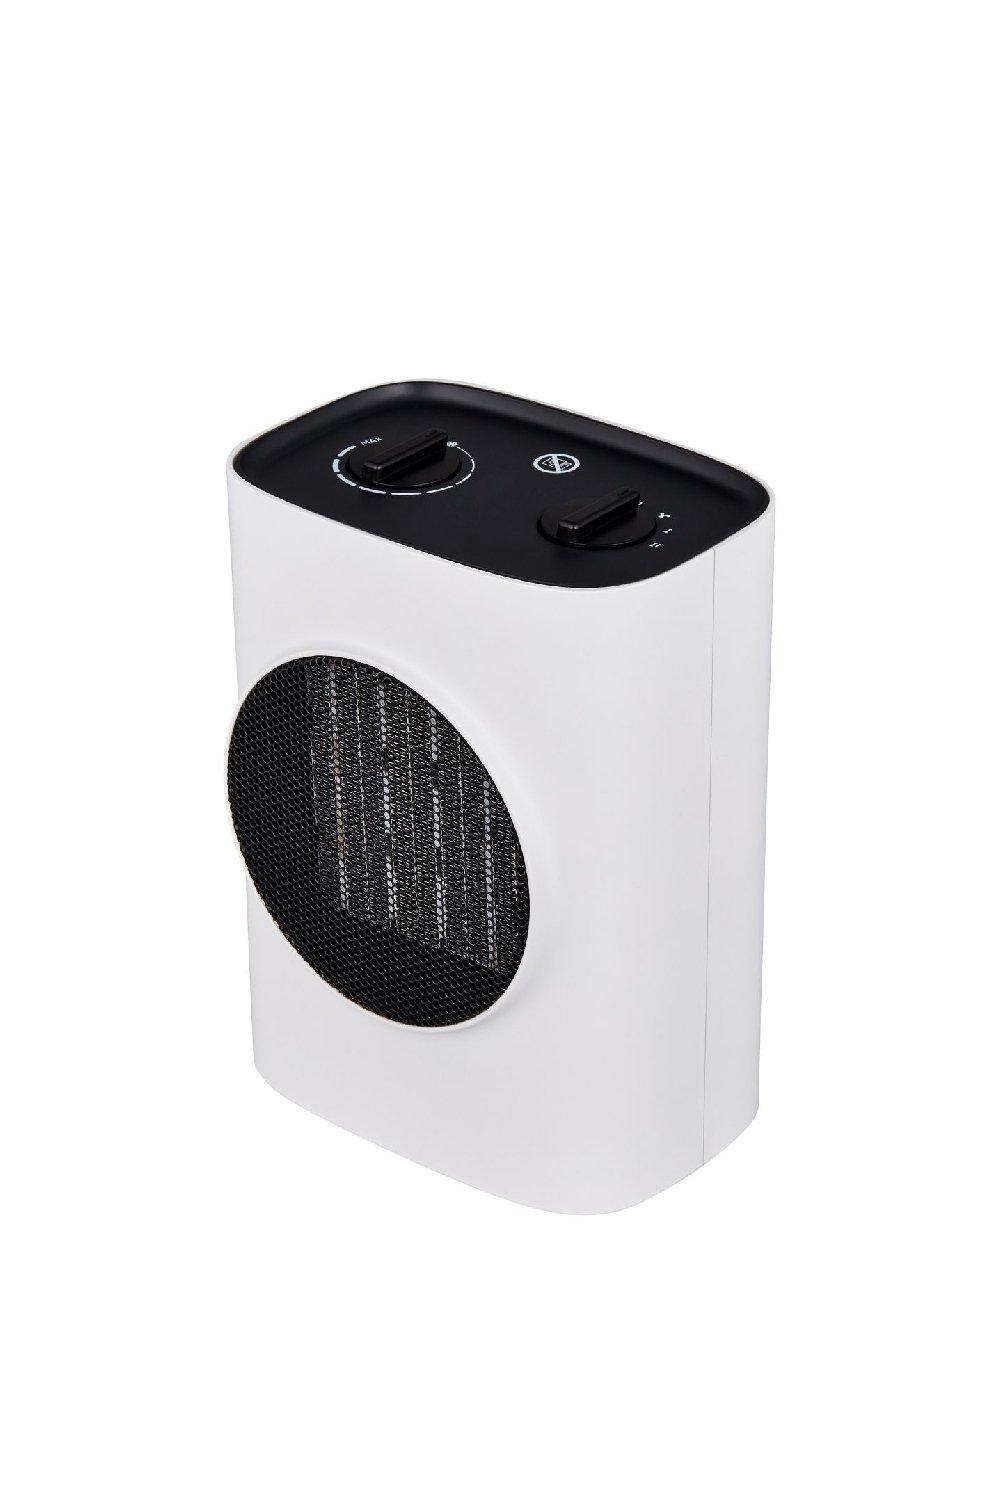 Apollo - PTC Tower Fan 1500w Heater with Remote - Compact